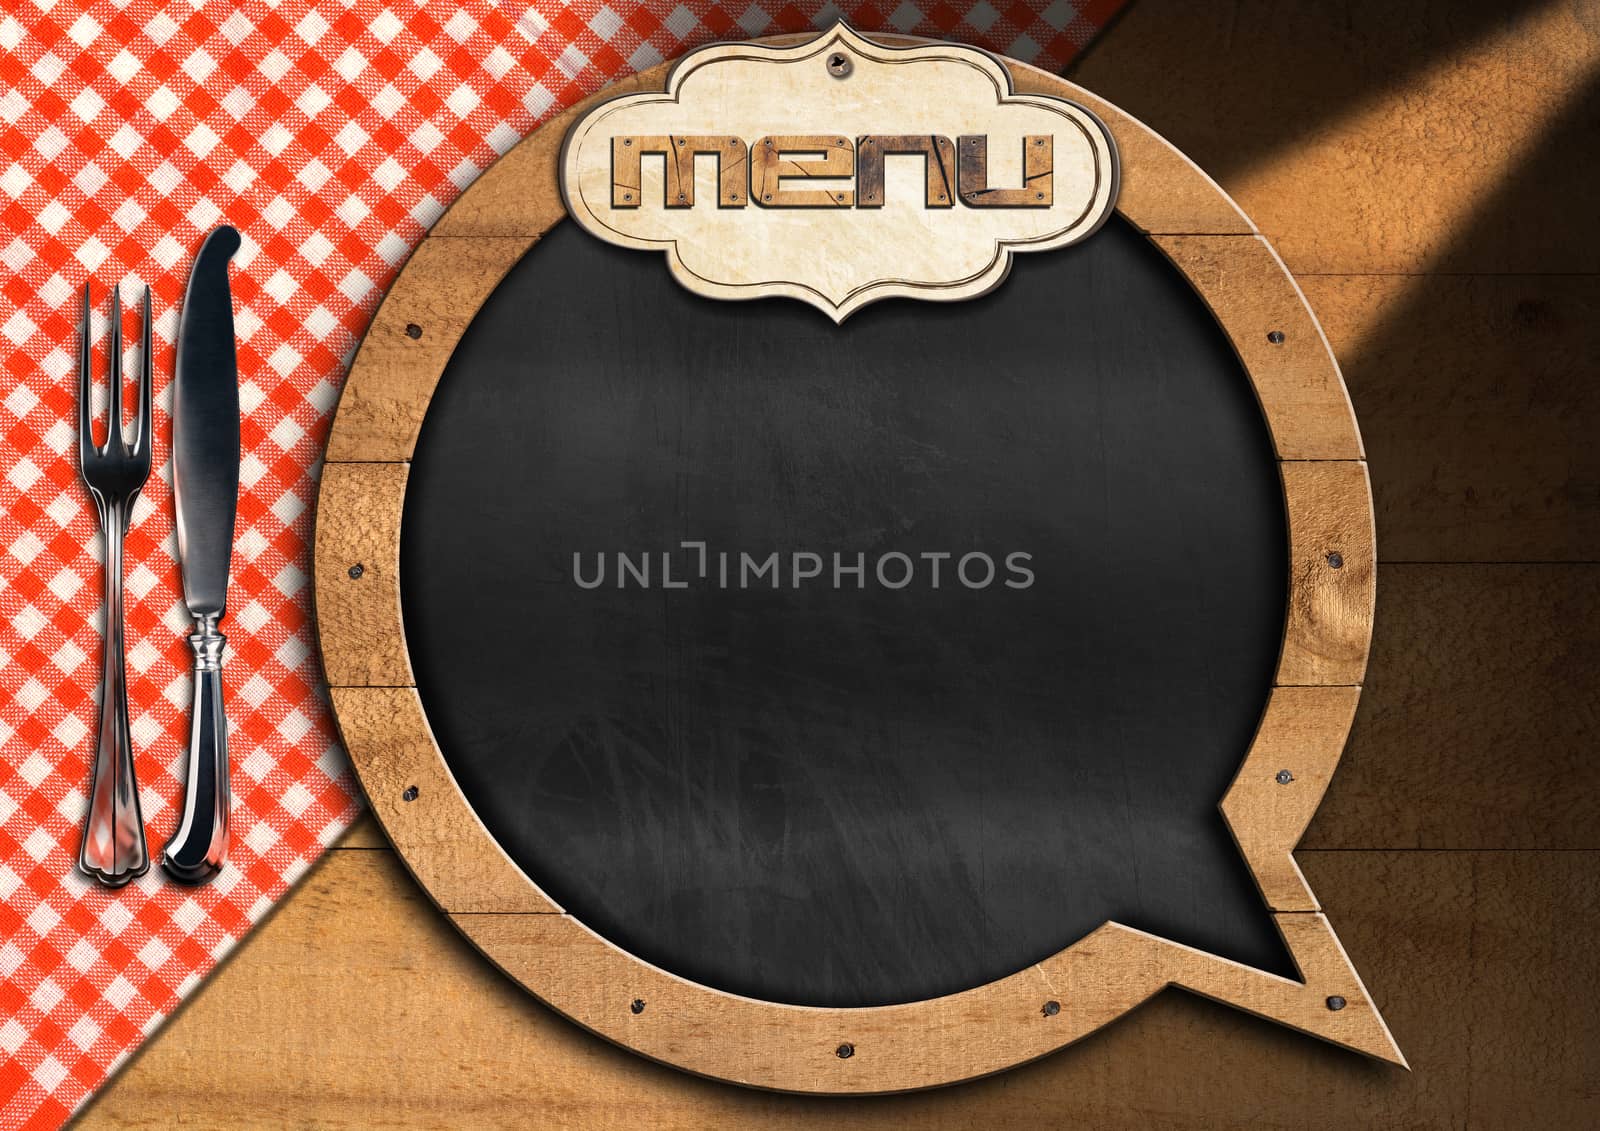 Restaurant menu with empty blackboard in the shape of speech bubble on a wooden background with silver cutlery and checkered tablecloth